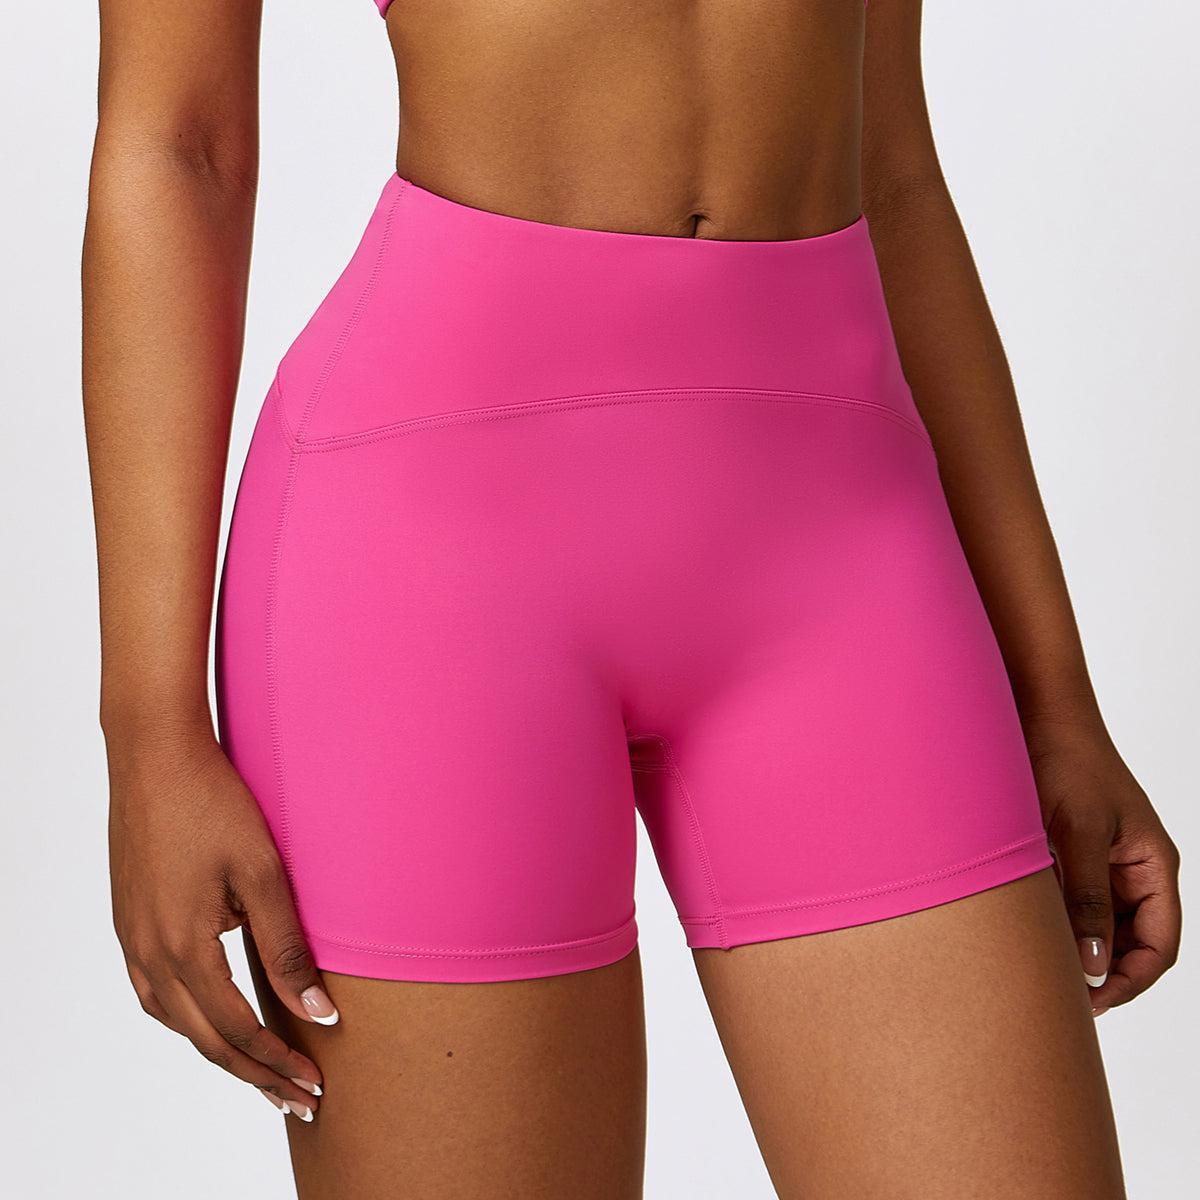 a close up of a person wearing a pink shorts